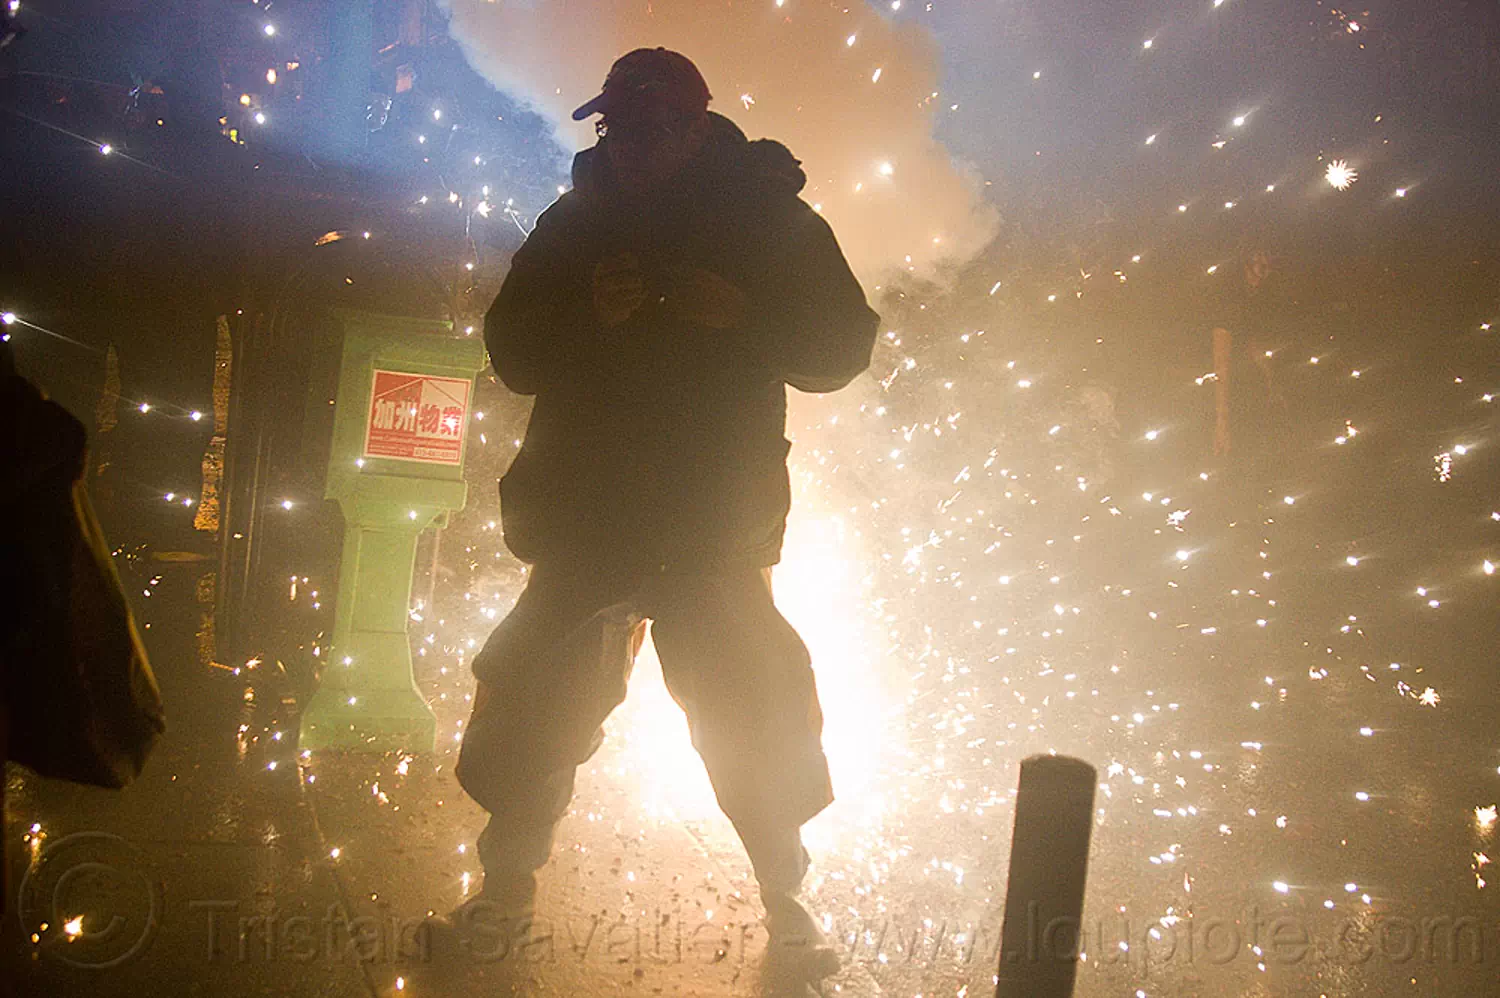 pyrotechnic explosion - chinese new year street celebration (san francisco), backlight, chinatown bang, chinese new year, explosion, firecrackers, lunar new year, man, night, pyrotechnics, silhouette, smoke, sparks